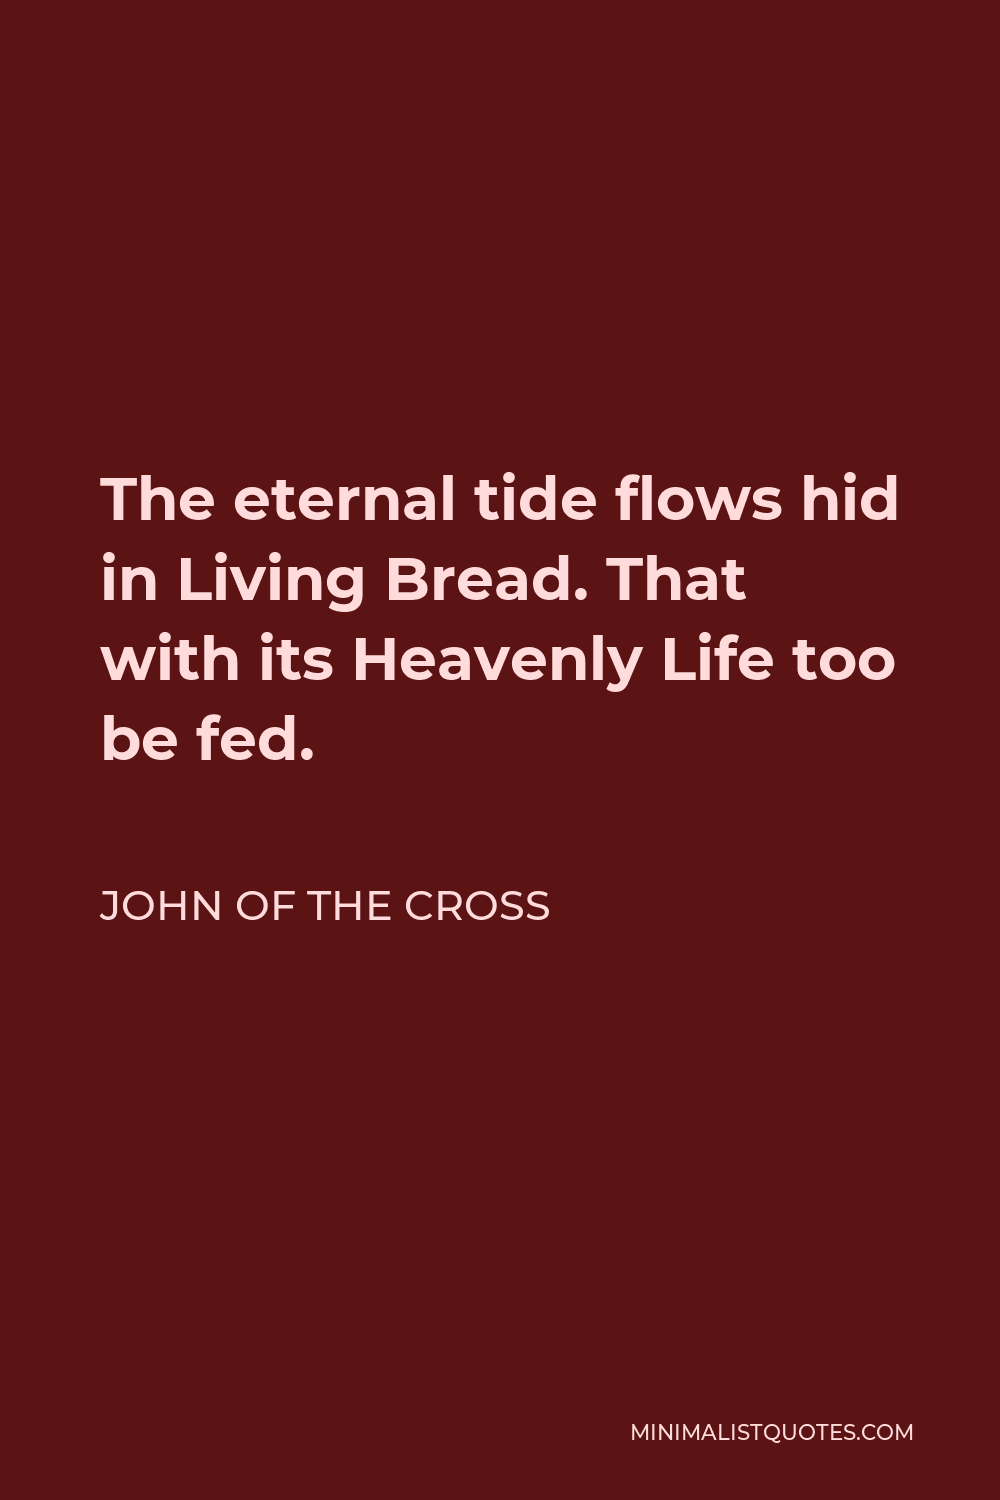 John of the Cross Quote - The eternal tide flows hid in Living Bread. That with its Heavenly Life too be fed.